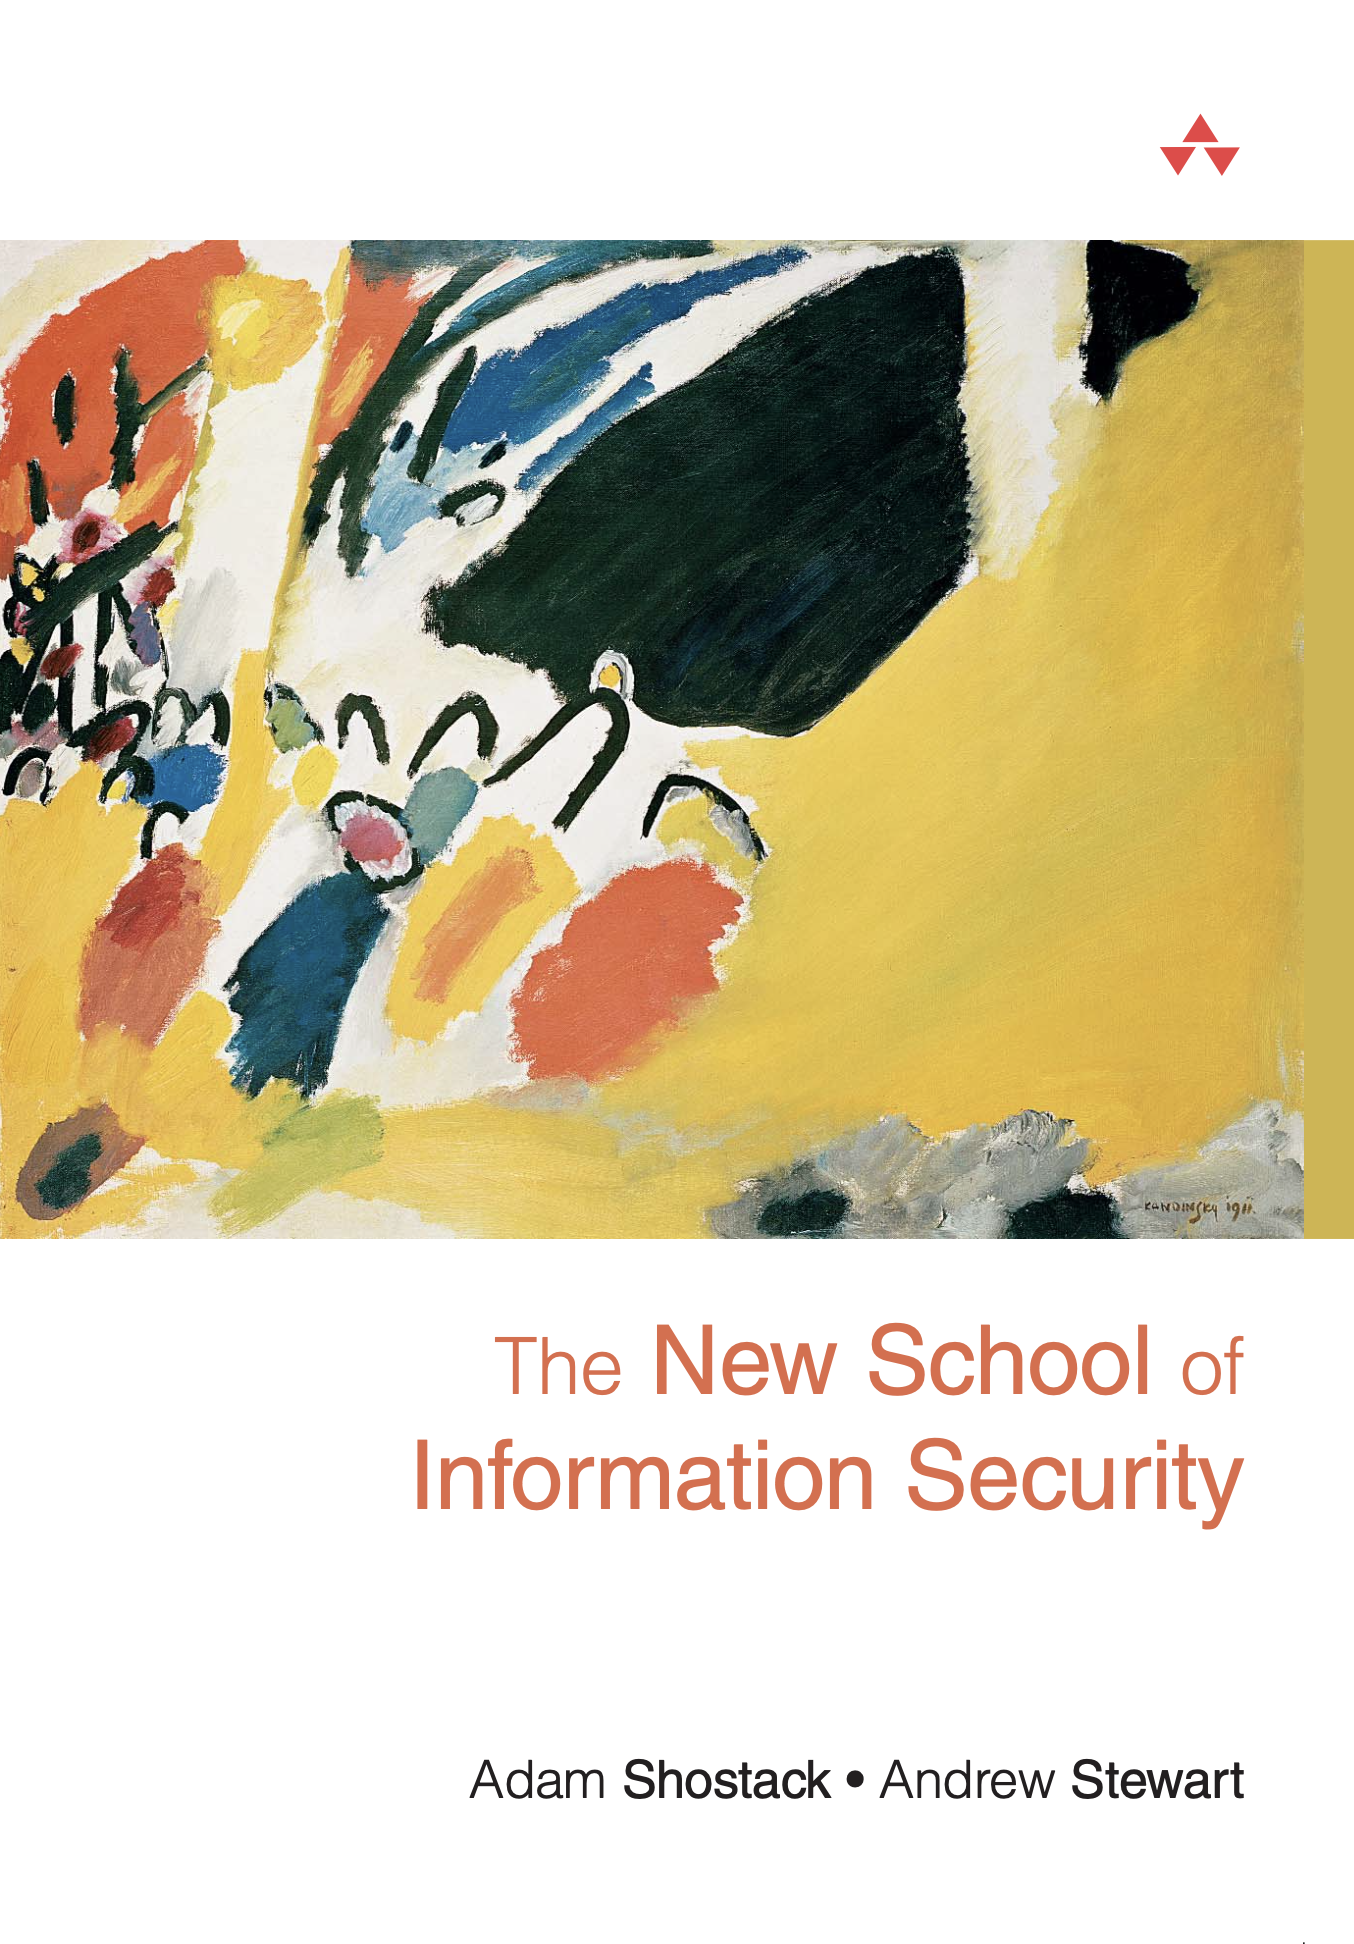 Cover of The New School of Information Security book